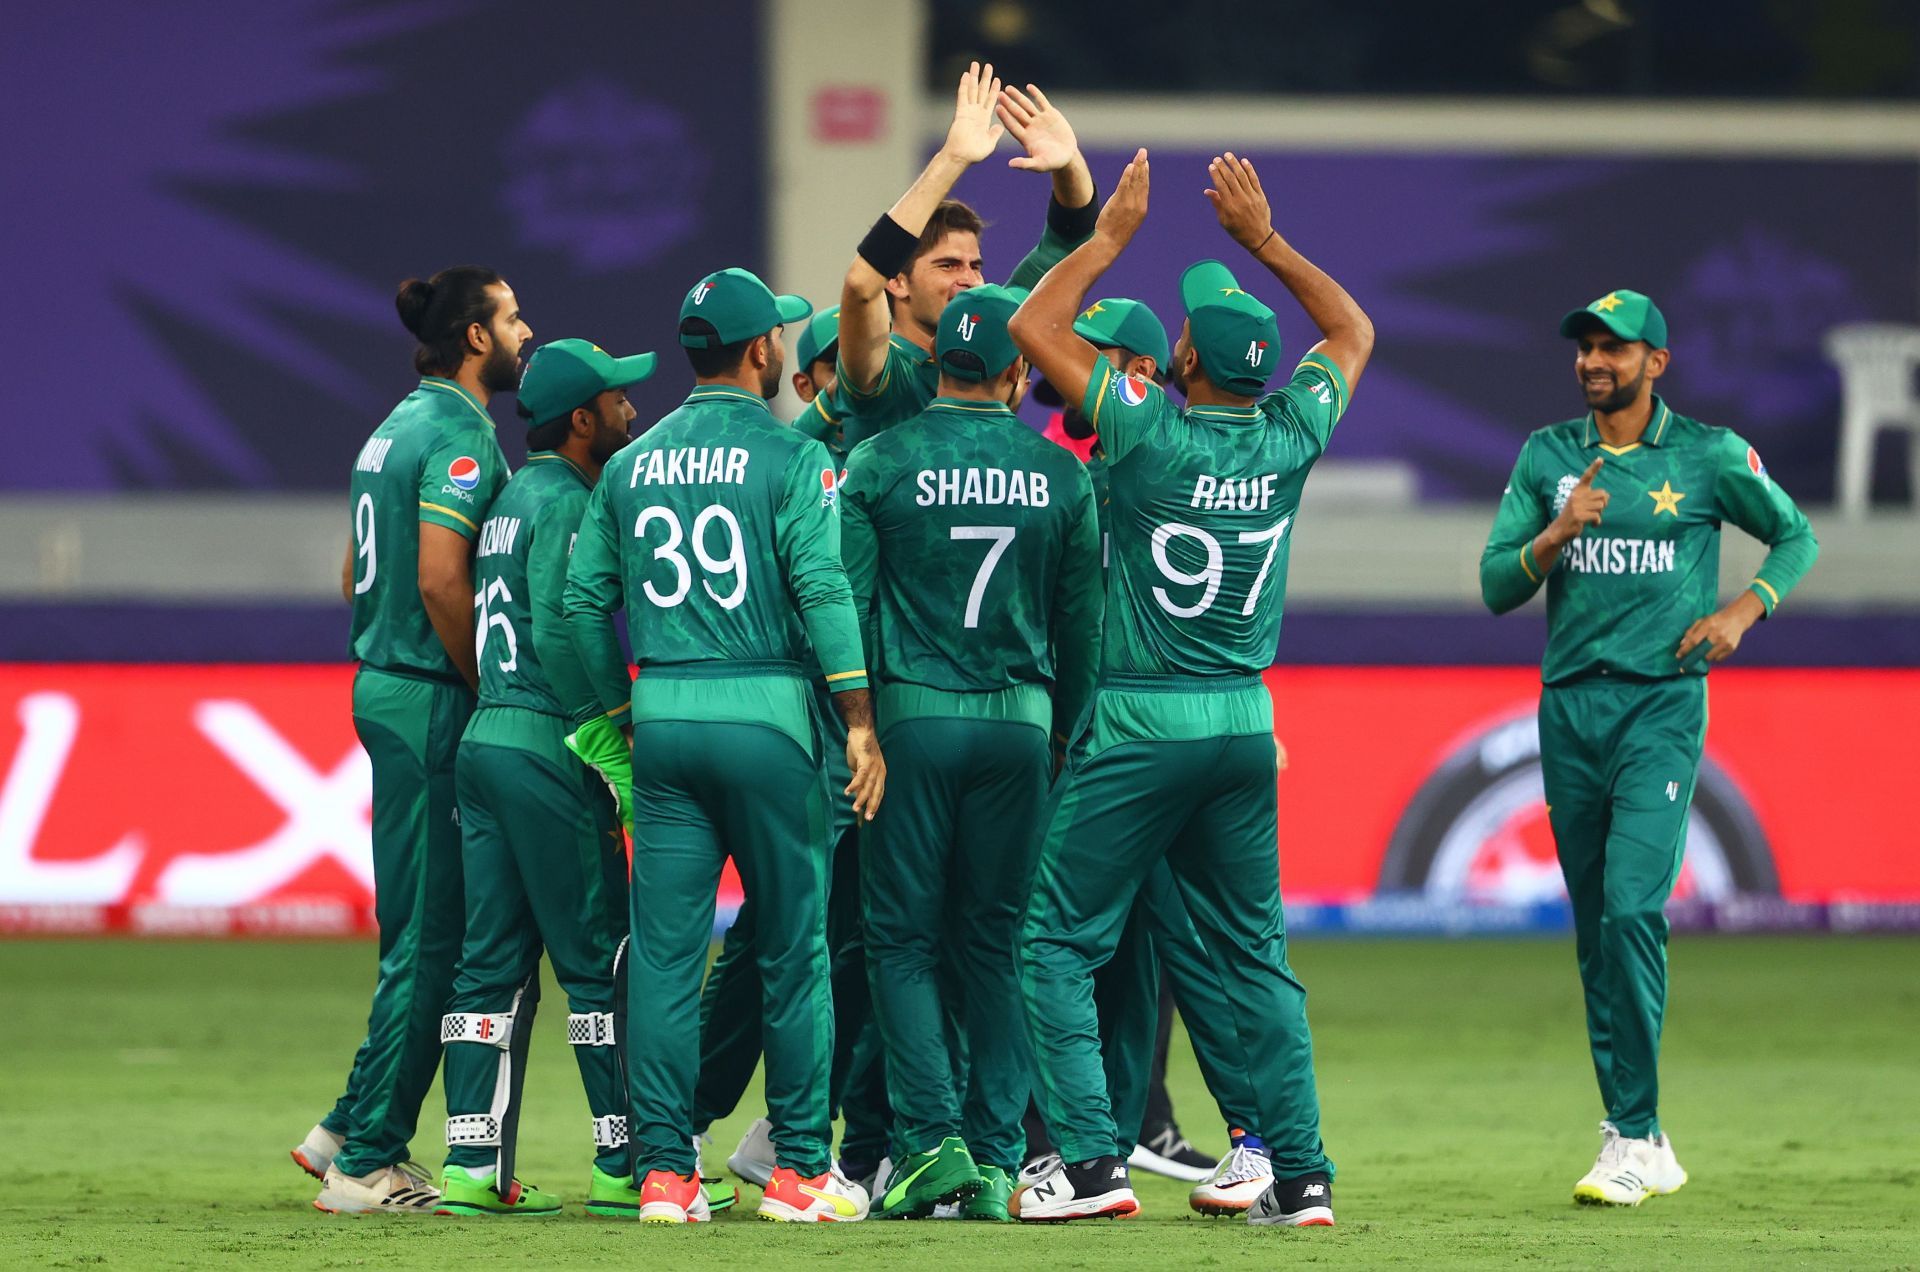 It was a near flawless outing for Pakistan as they hit the ground running from the word go.